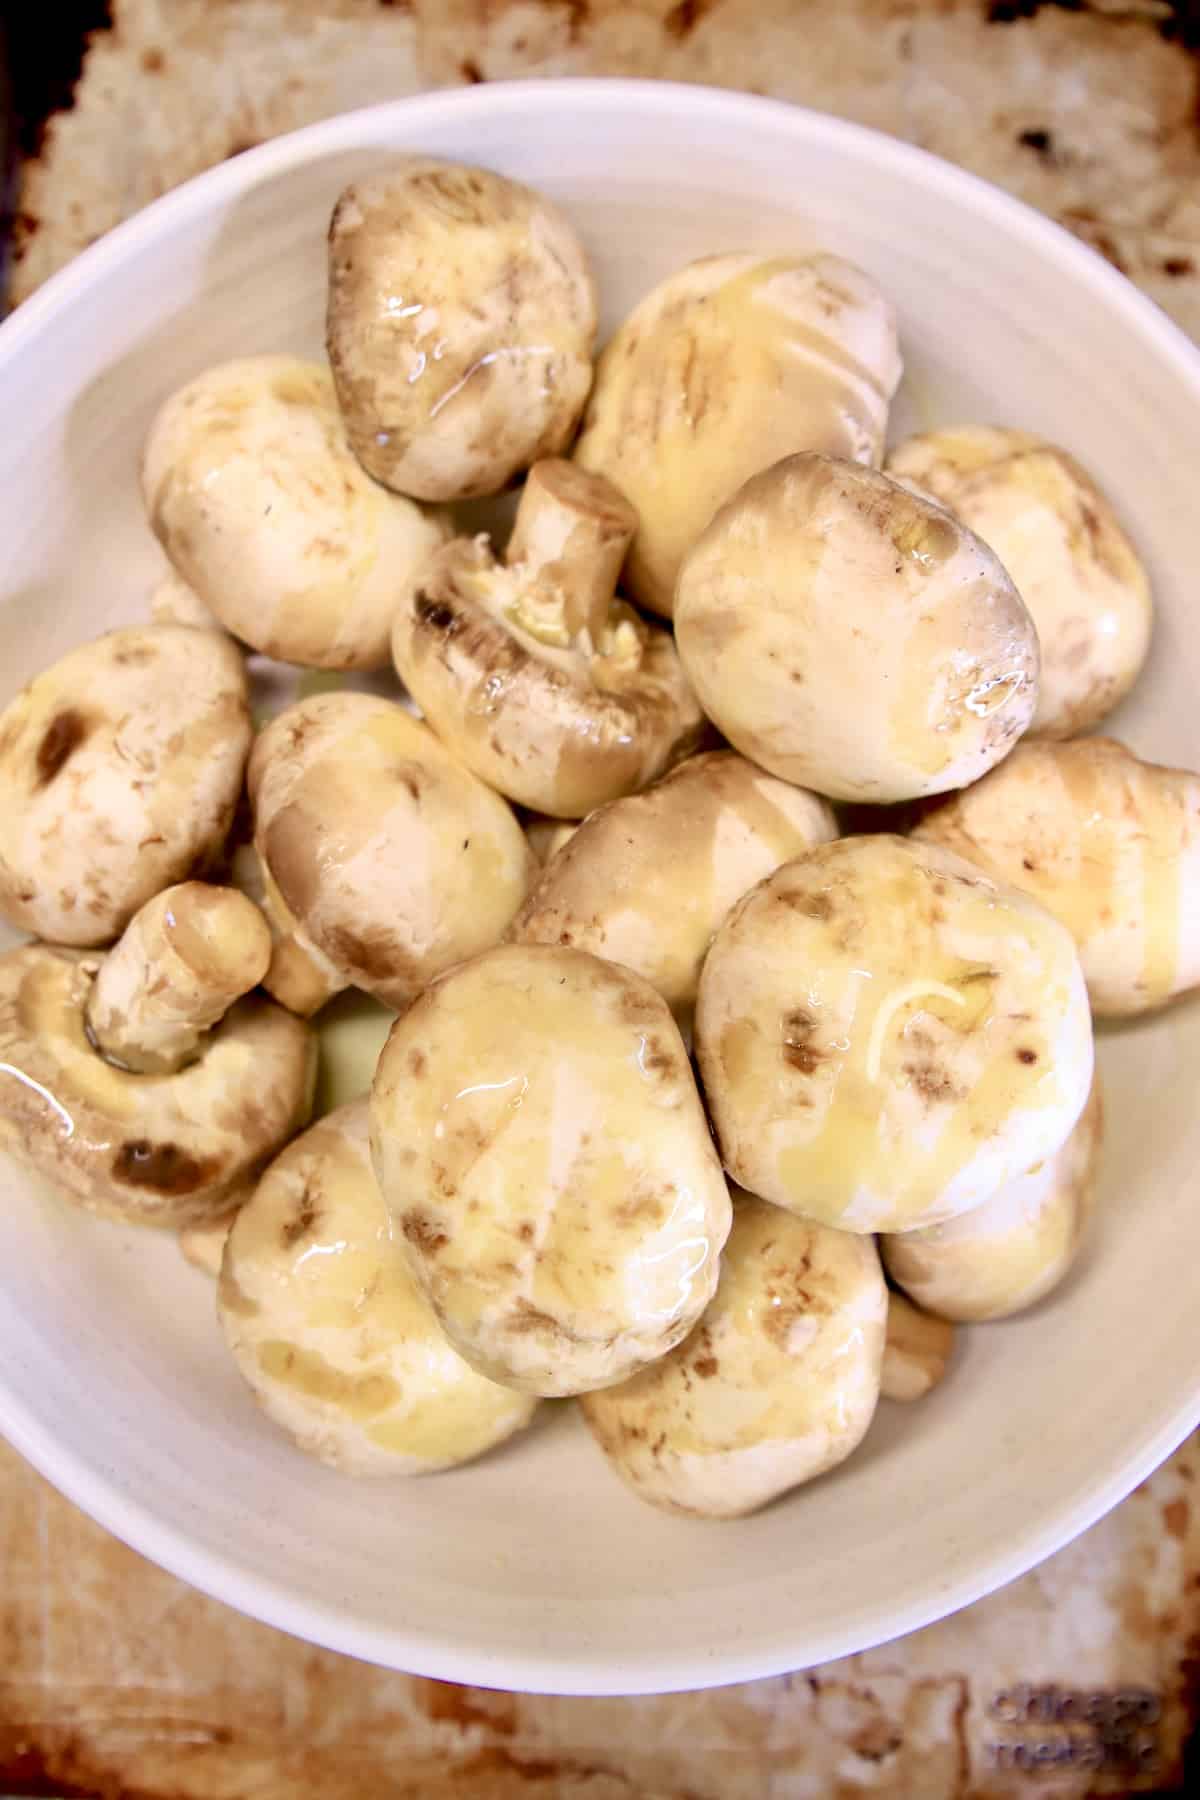 Whole white mushrooms in a bowl.